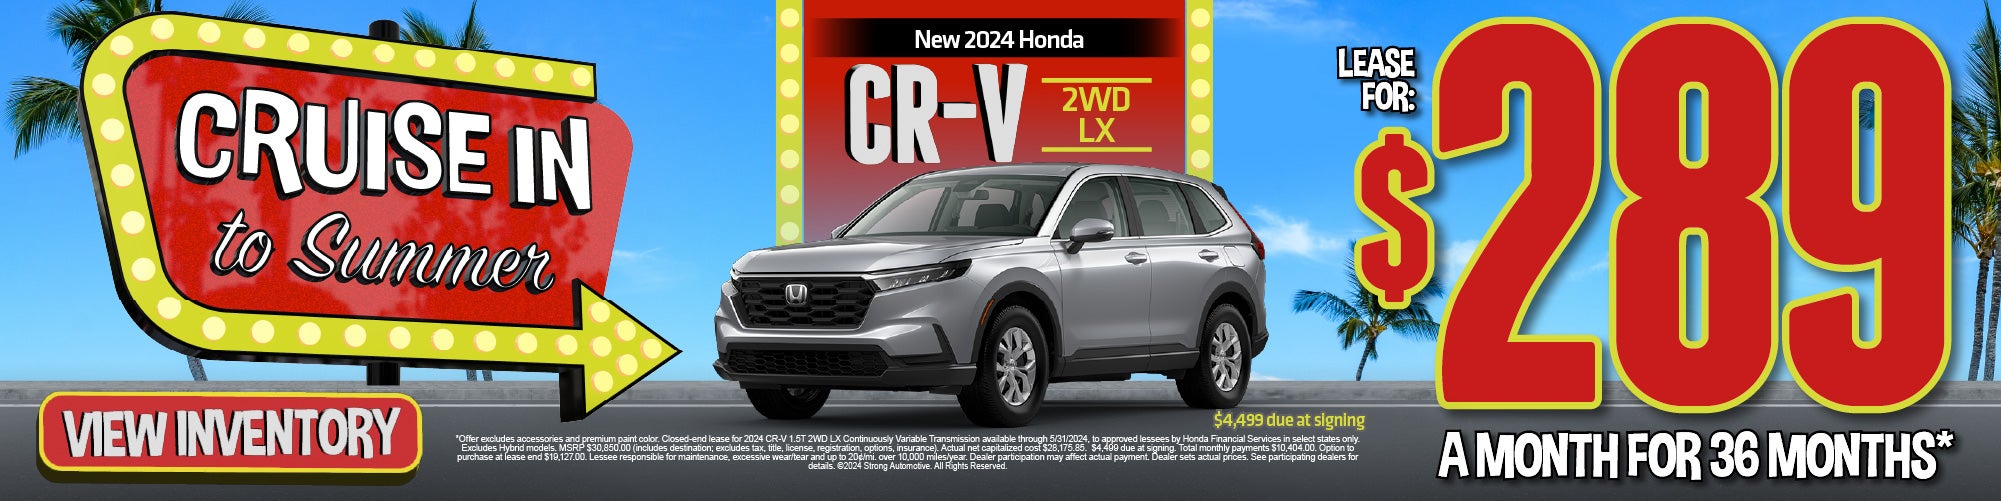 2024 Honda CR-V 2WD LX - $289 a month for 36 months* $4,499